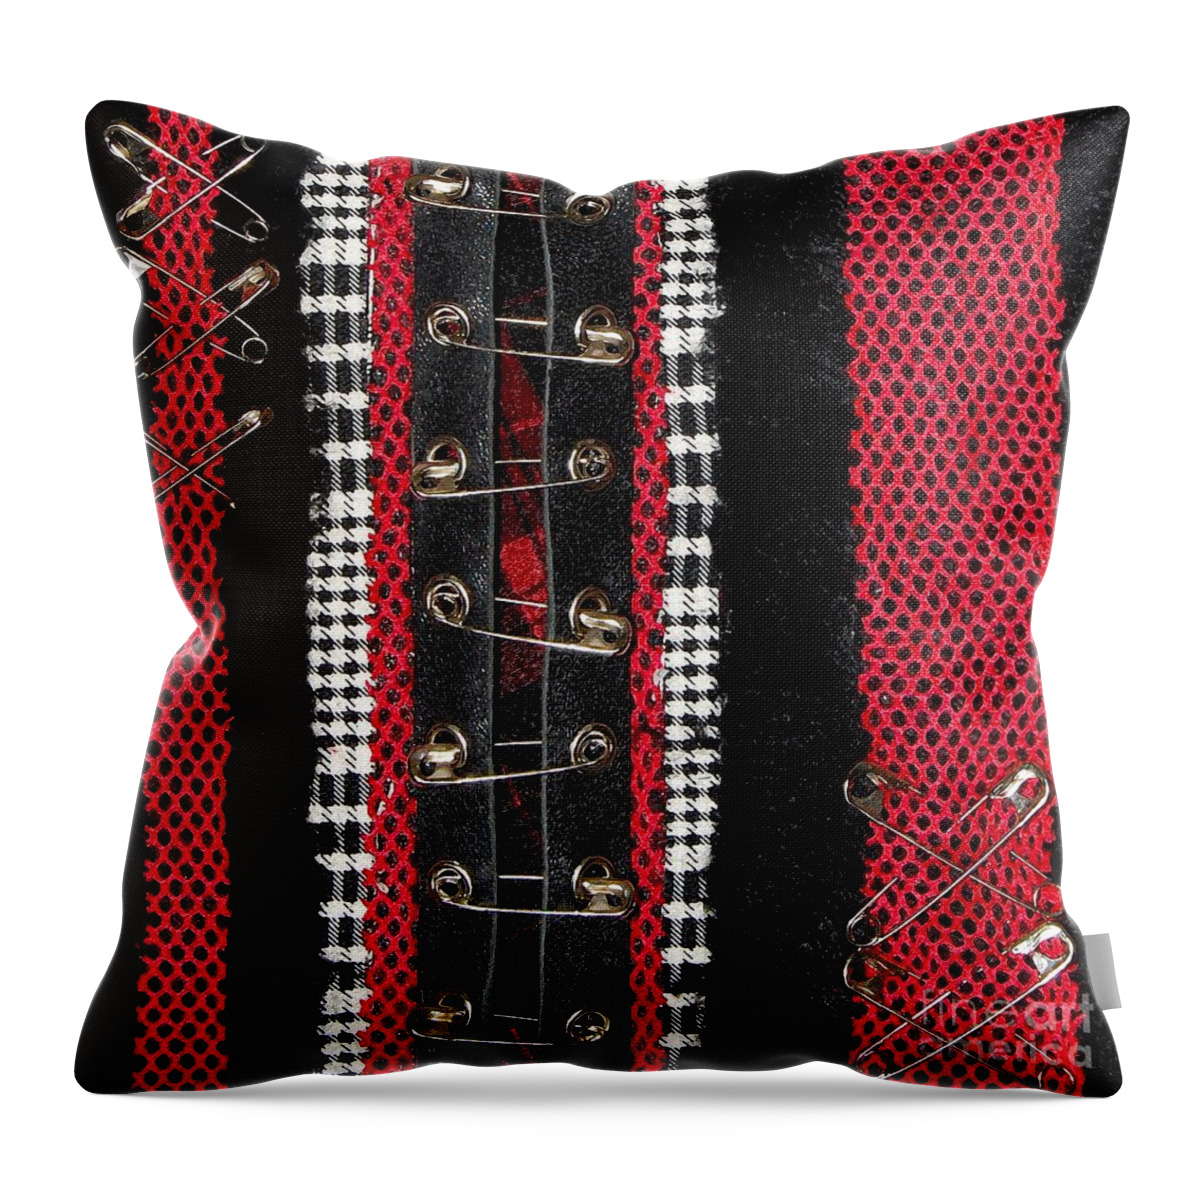 Punk Art Throw Pillow featuring the mixed media Safety Pins 2 by Roseanne Jones